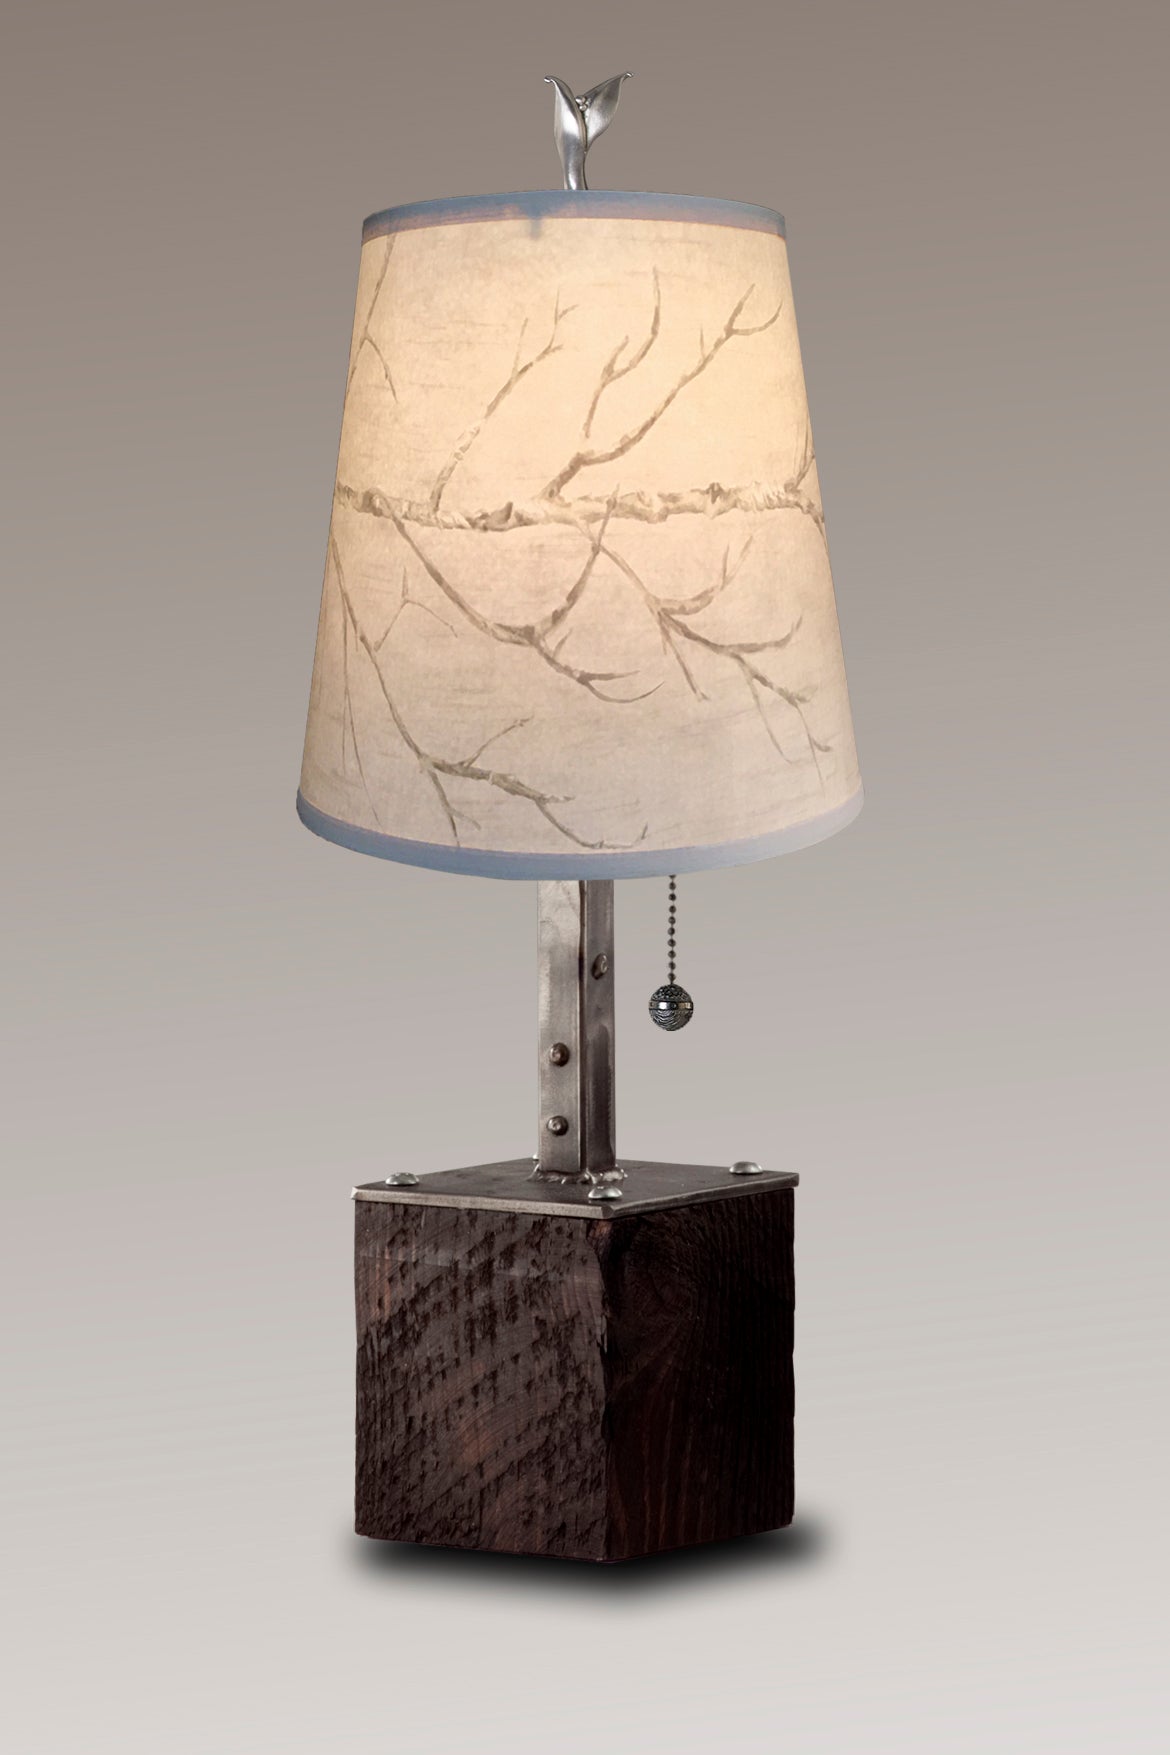 Steel Table Lamp on Reclaimed Wood with Small Drum Shade in Sweeping Branch